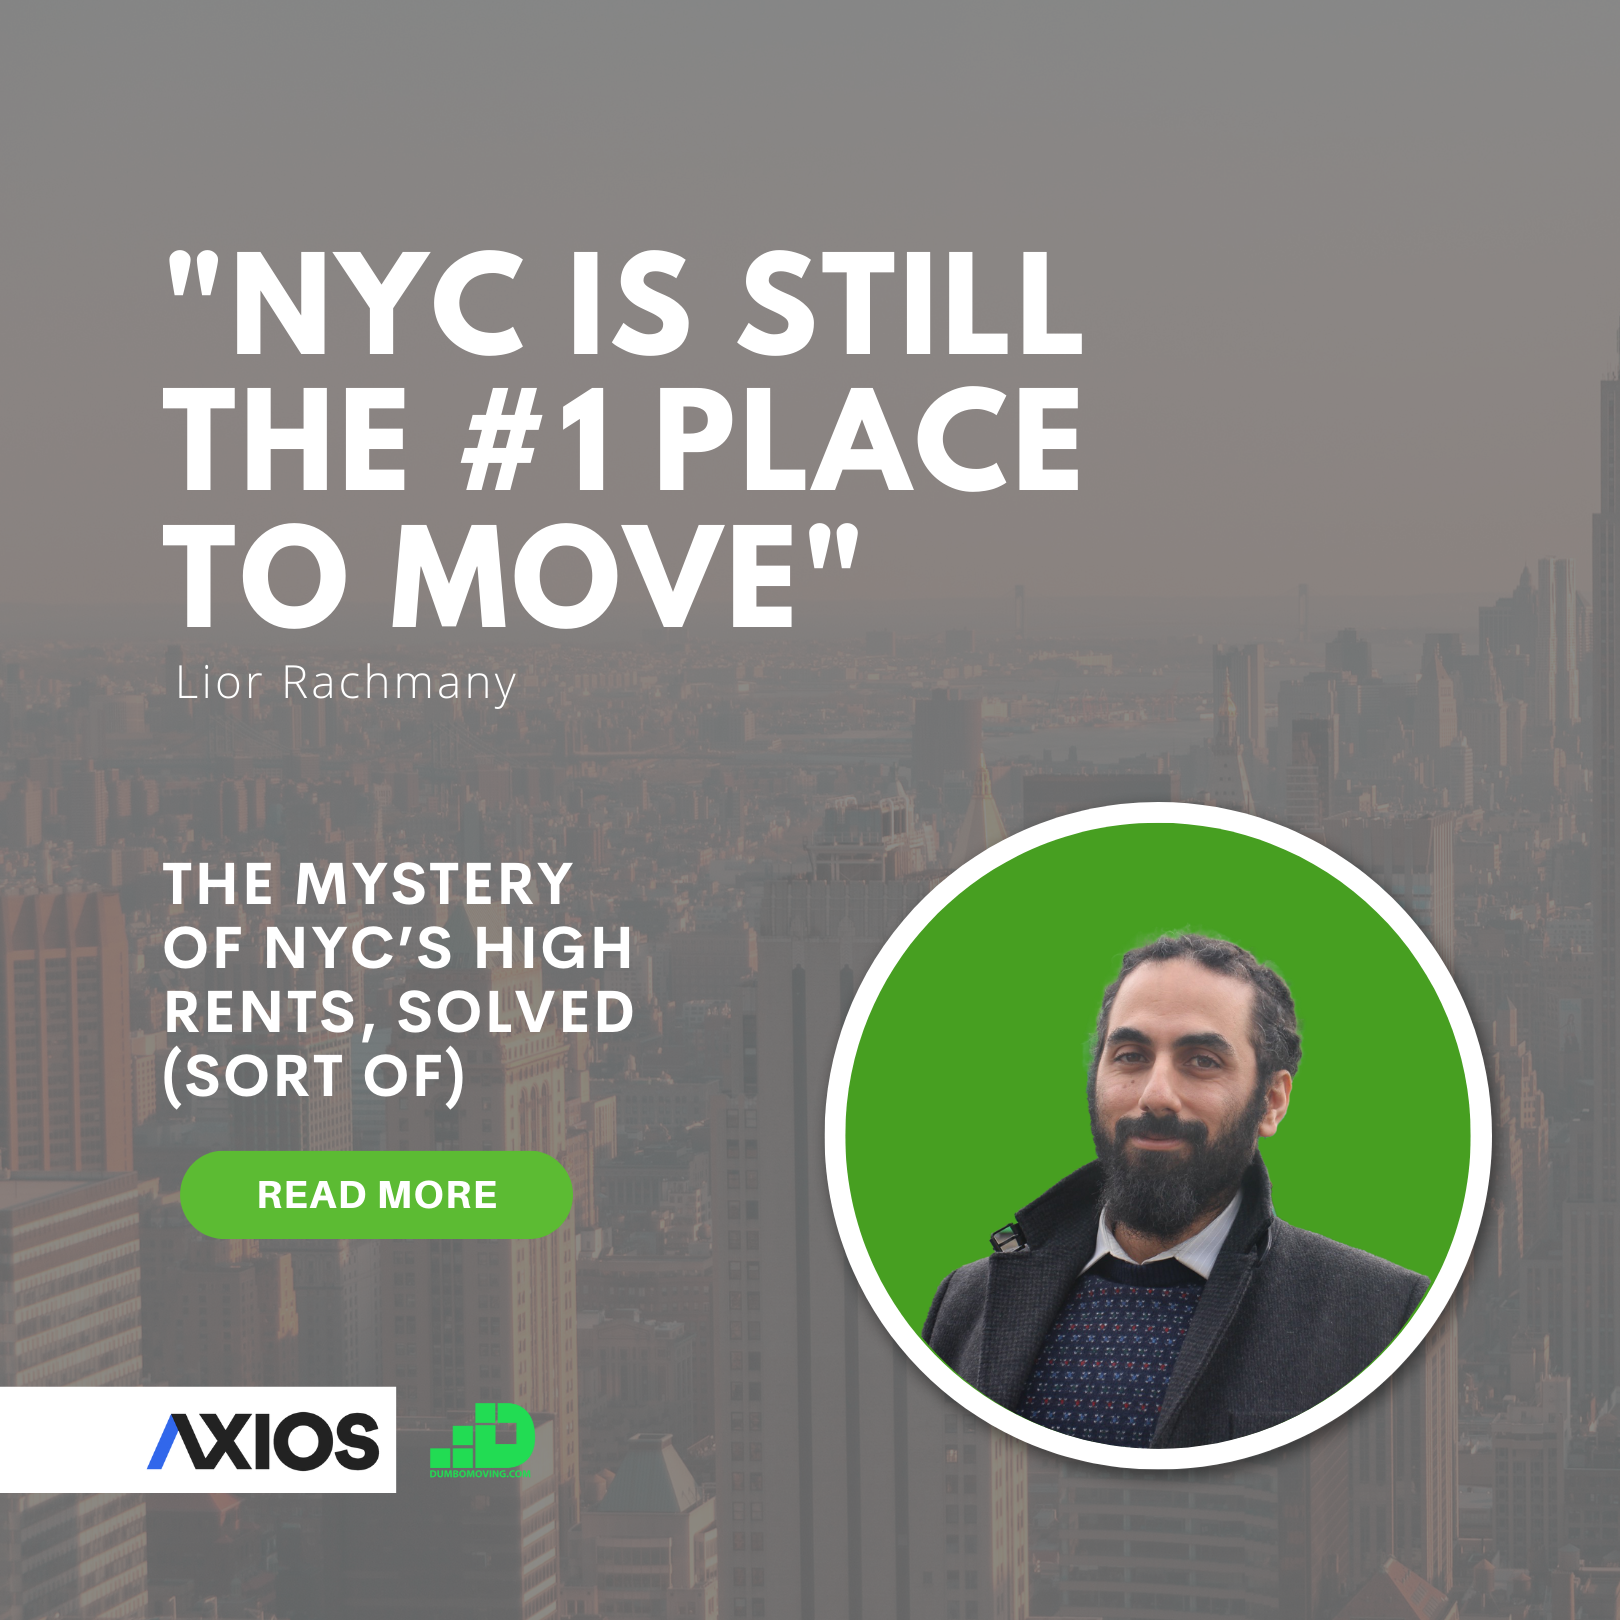 NYC Is Still No1 Place To Move